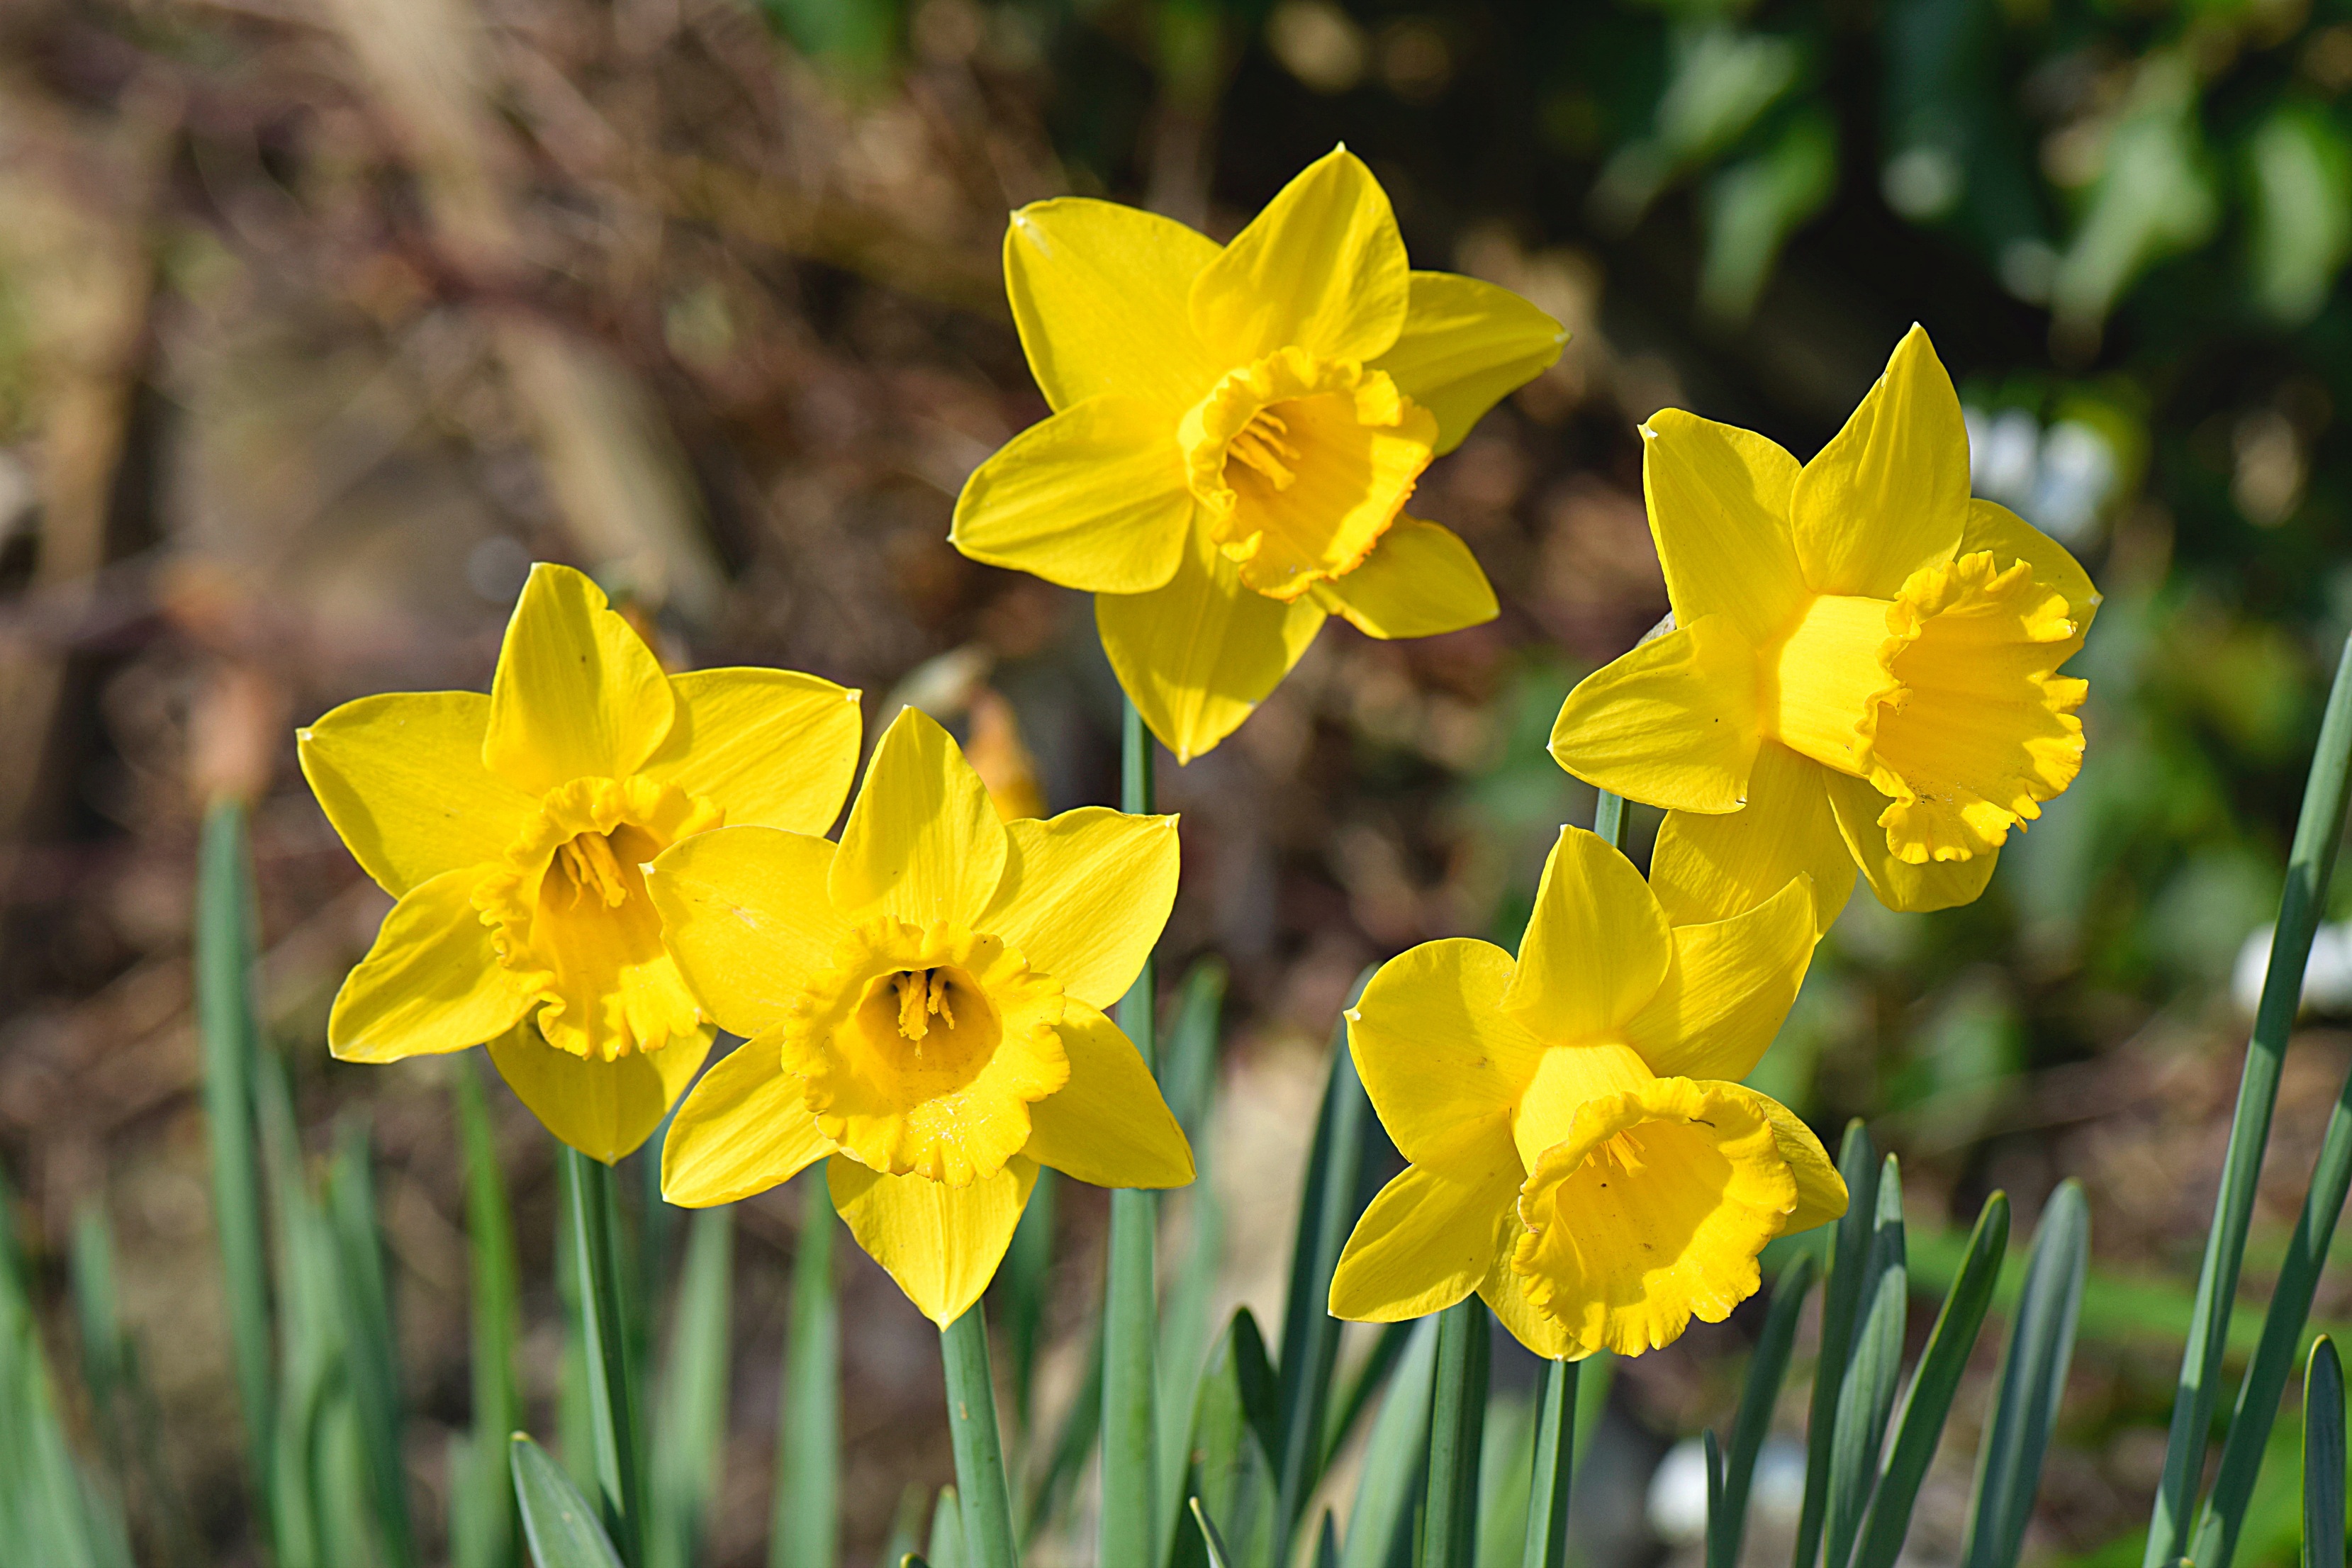 Gardening Tips for March